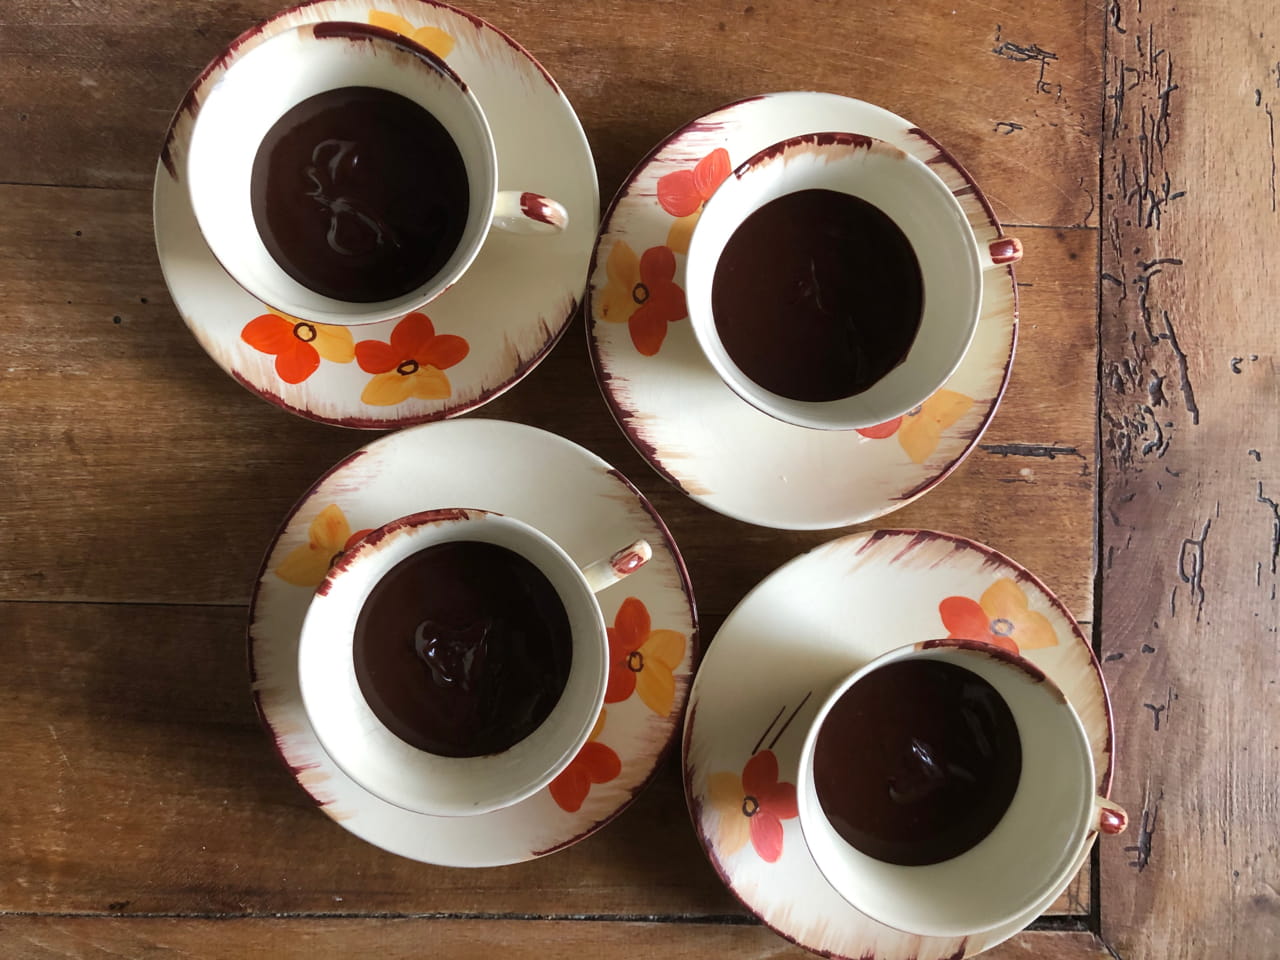 Max’s (well, actually Felicity’s) chocolate pots